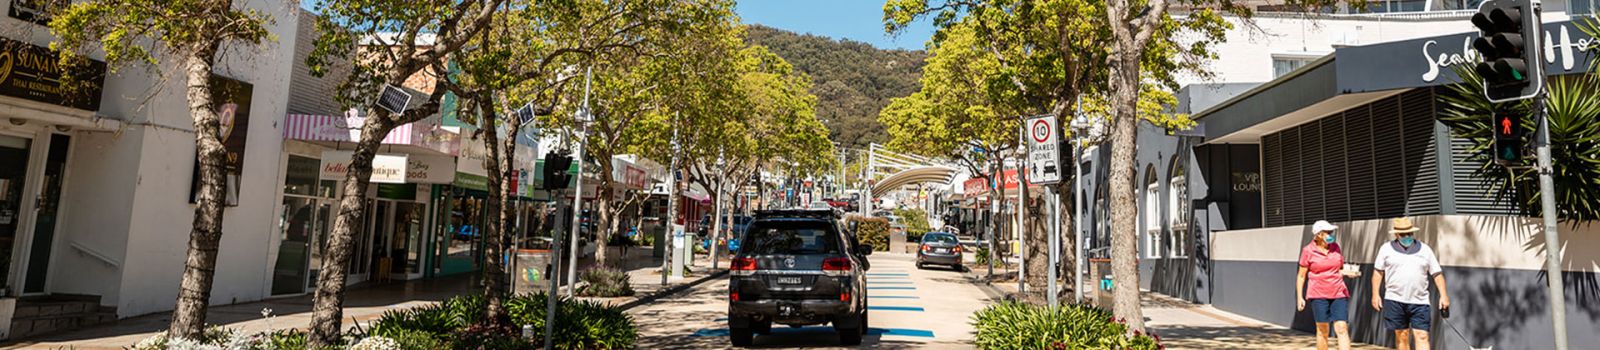 Image looking up the main street of Nelson Bay with all the shops  banner image